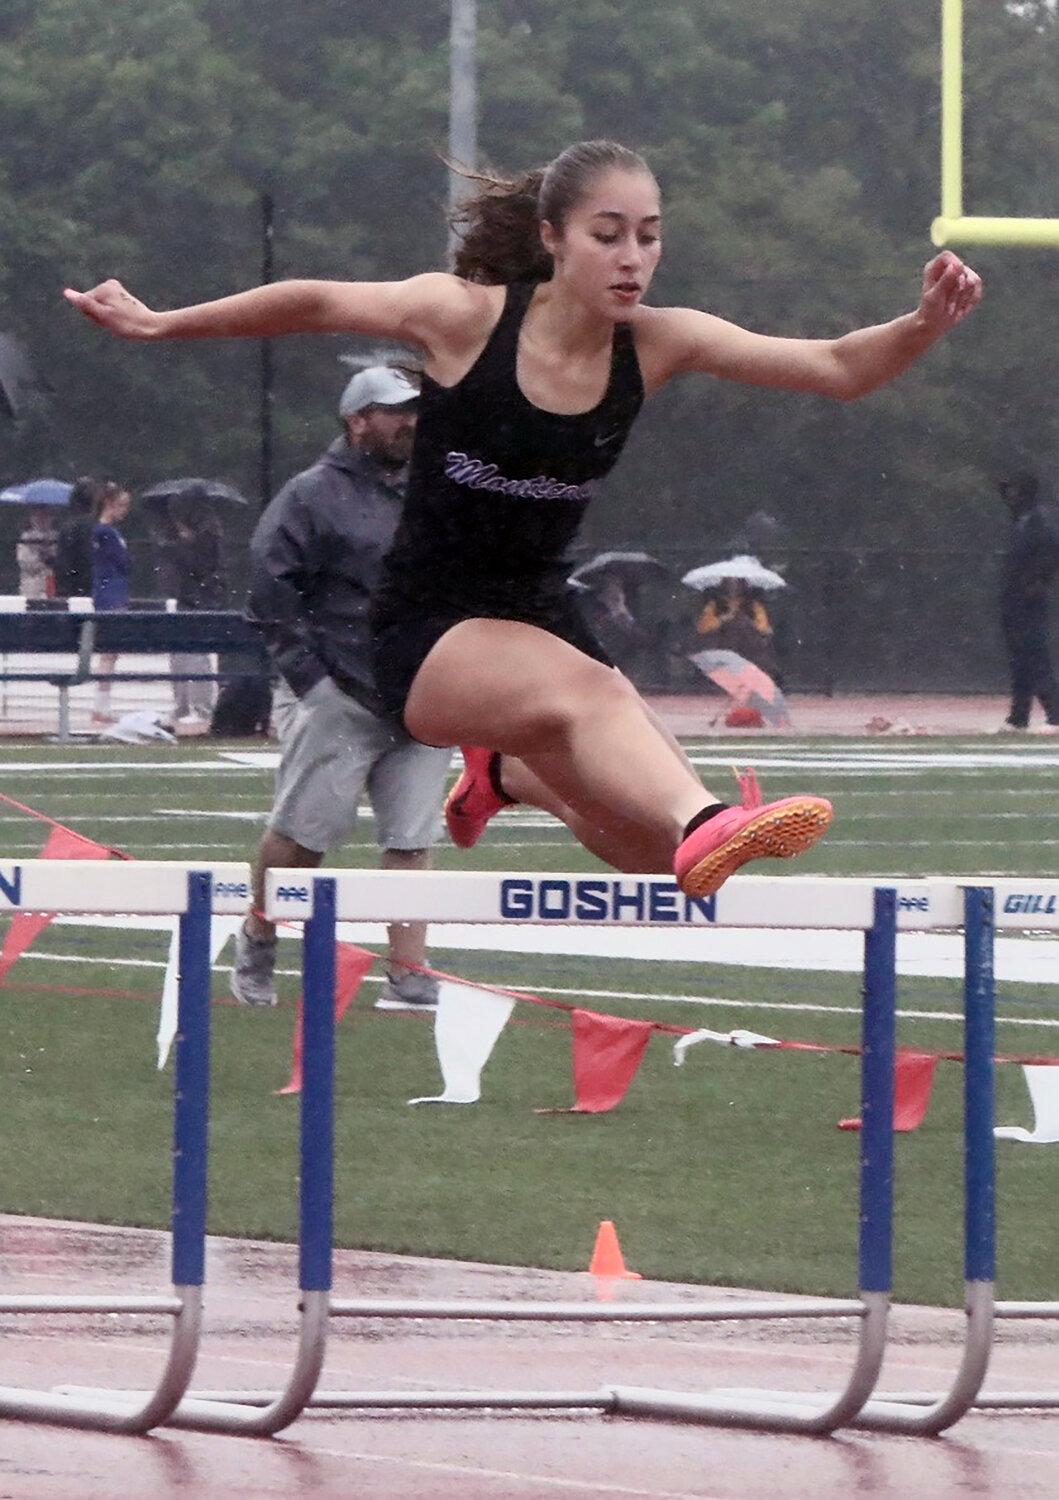 Monticello senior Taina DeJesus glides over the final barrier on her way to victory in the 400 hurdles. She took fifth in the 100 hurdles earlier.